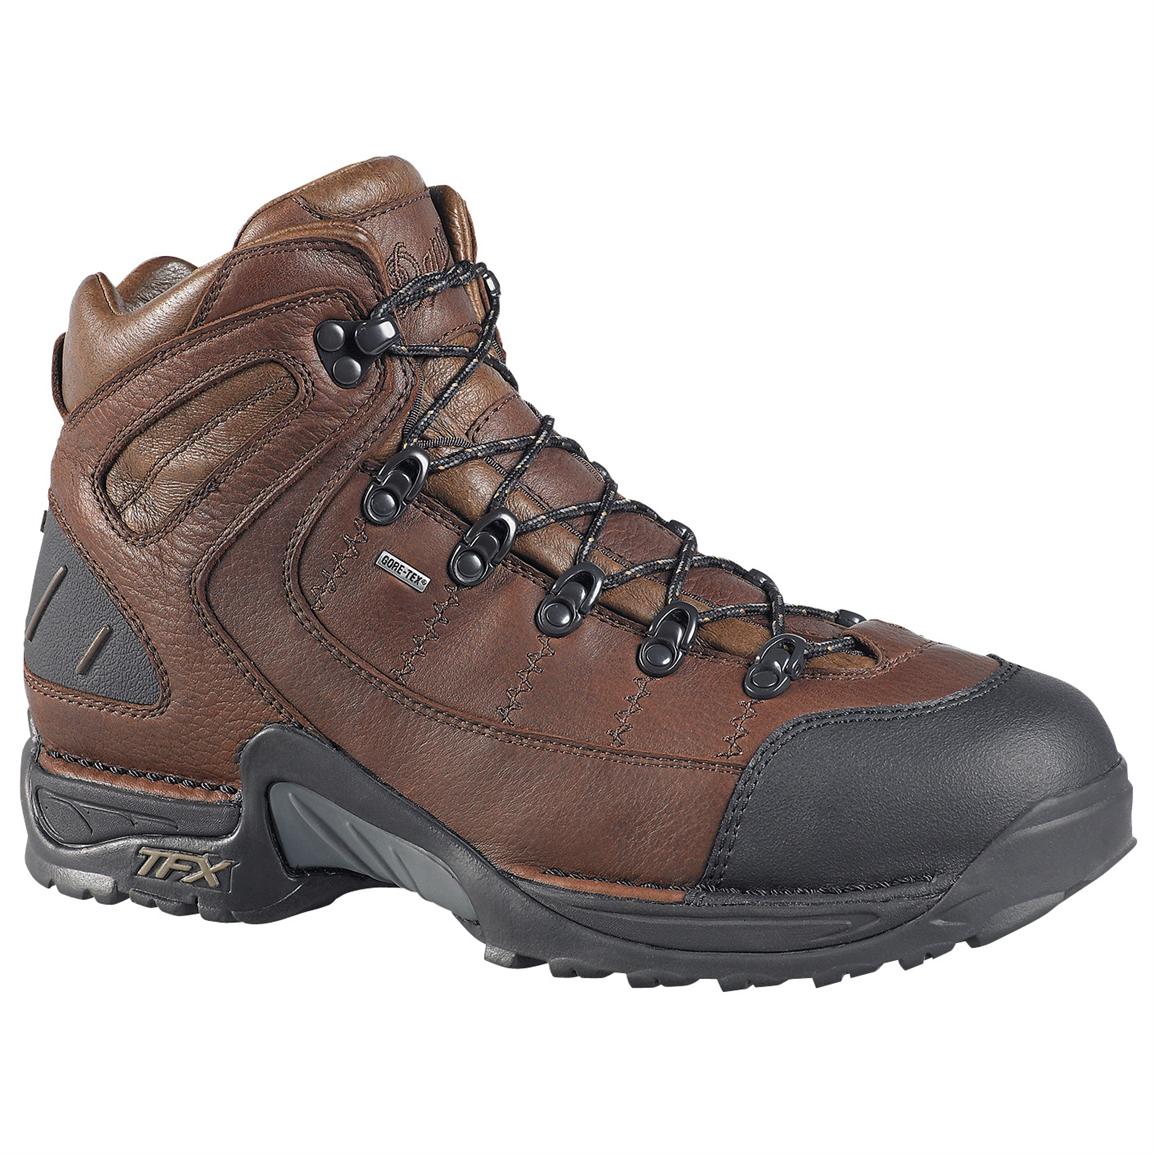 Men's Danner® 5 1/2" Brown Leather GORE - TEX® Hiking Boots - 130608